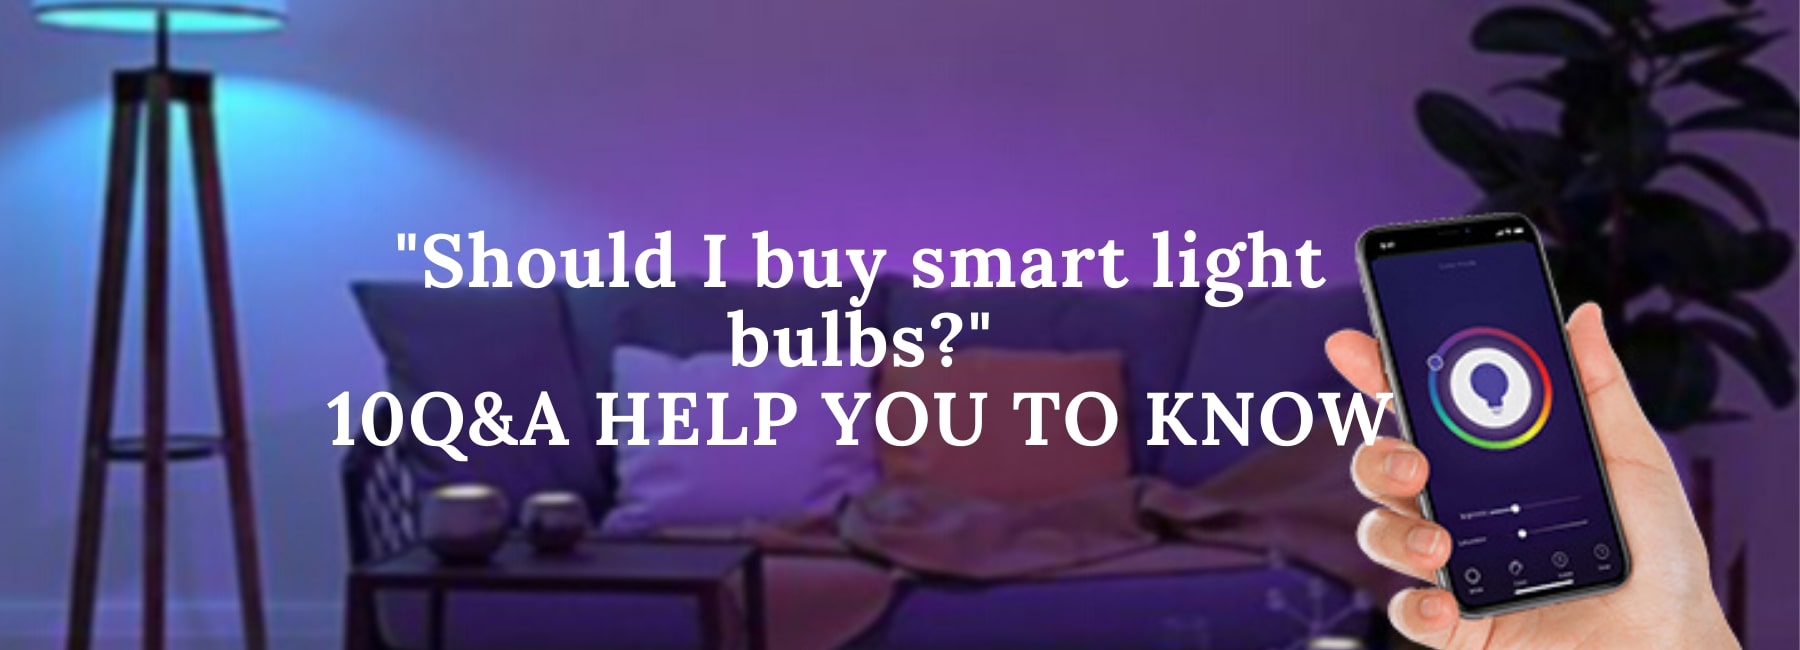 WHY NEED SMART BULBS? ARE THEY WORTH THE MONEY? 10 Q&A HELP YOU TO KNOW